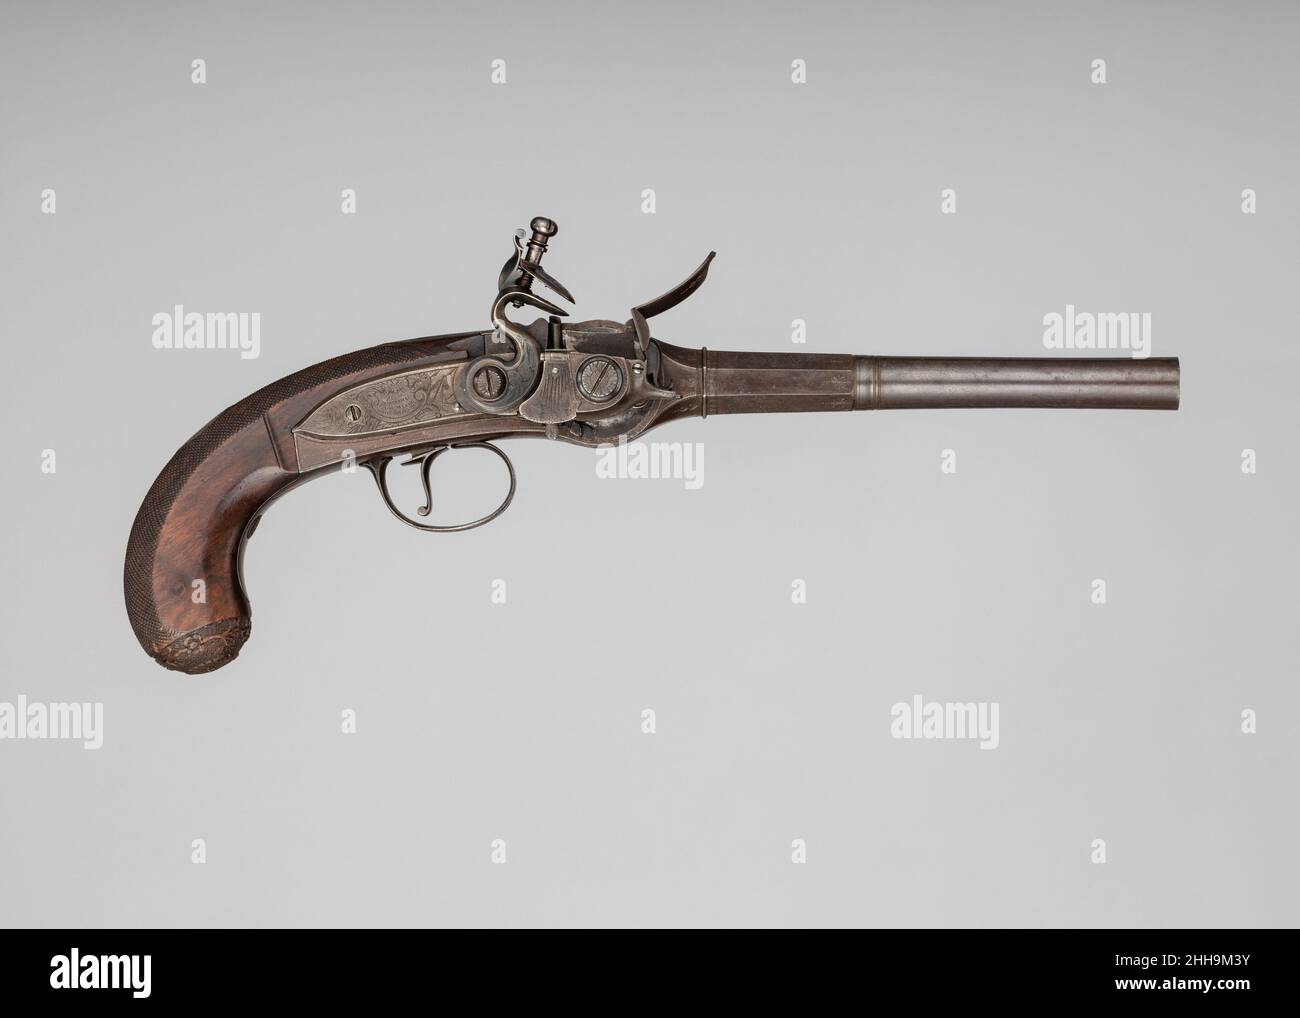 Repeating Pistol High Resolution Stock Photography and Images - Alamy